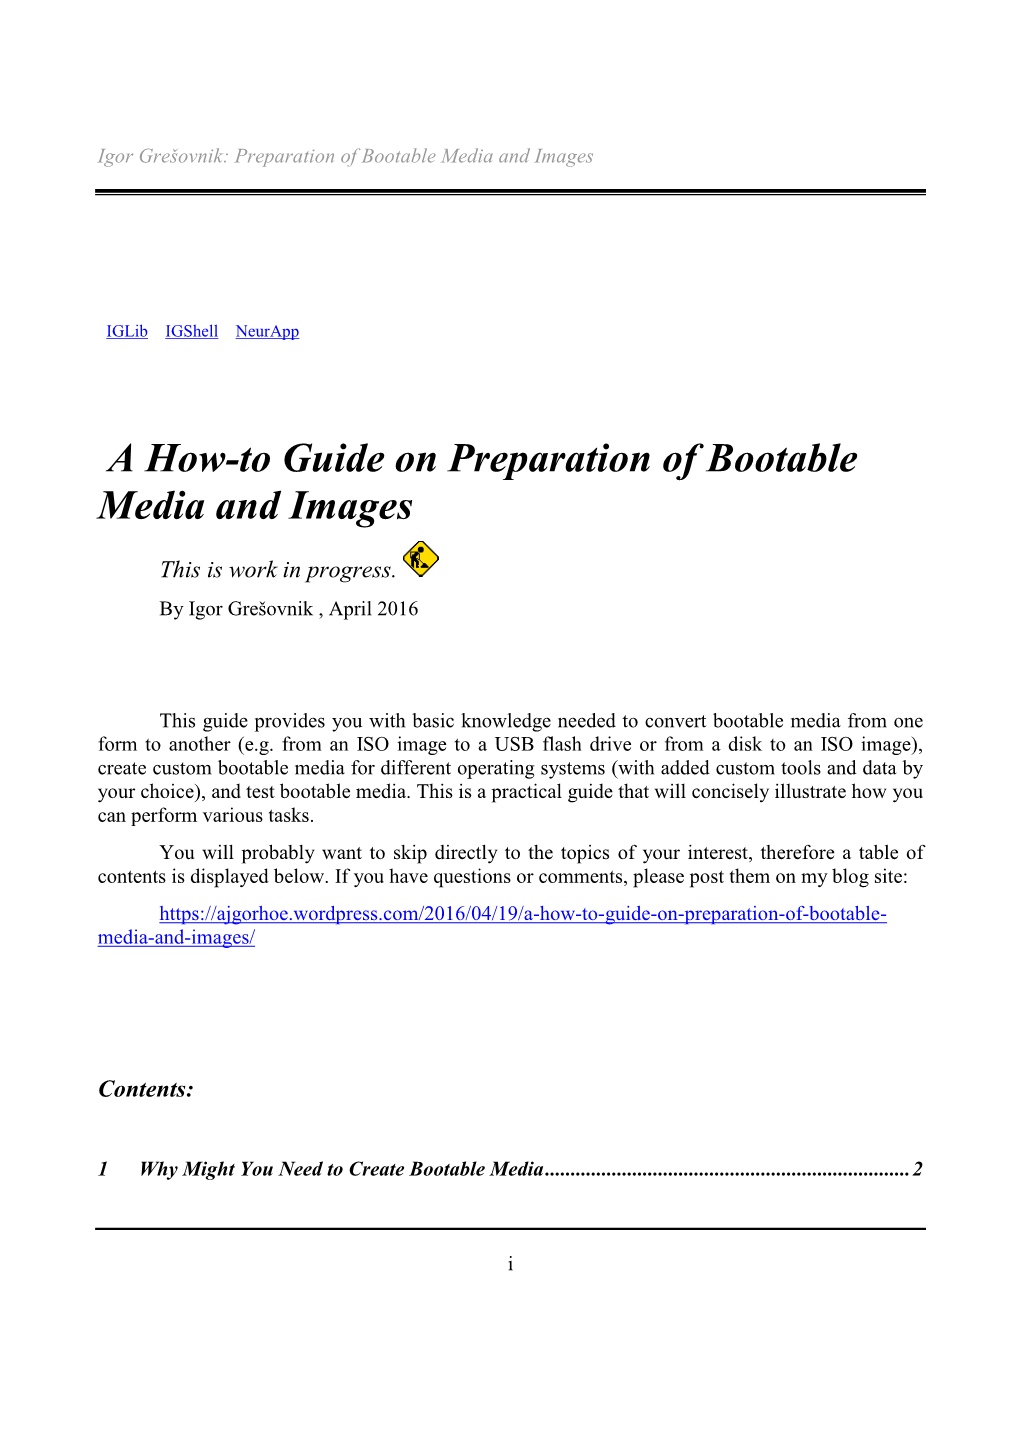 Bootable Media and Images Preparation Guide with How-To